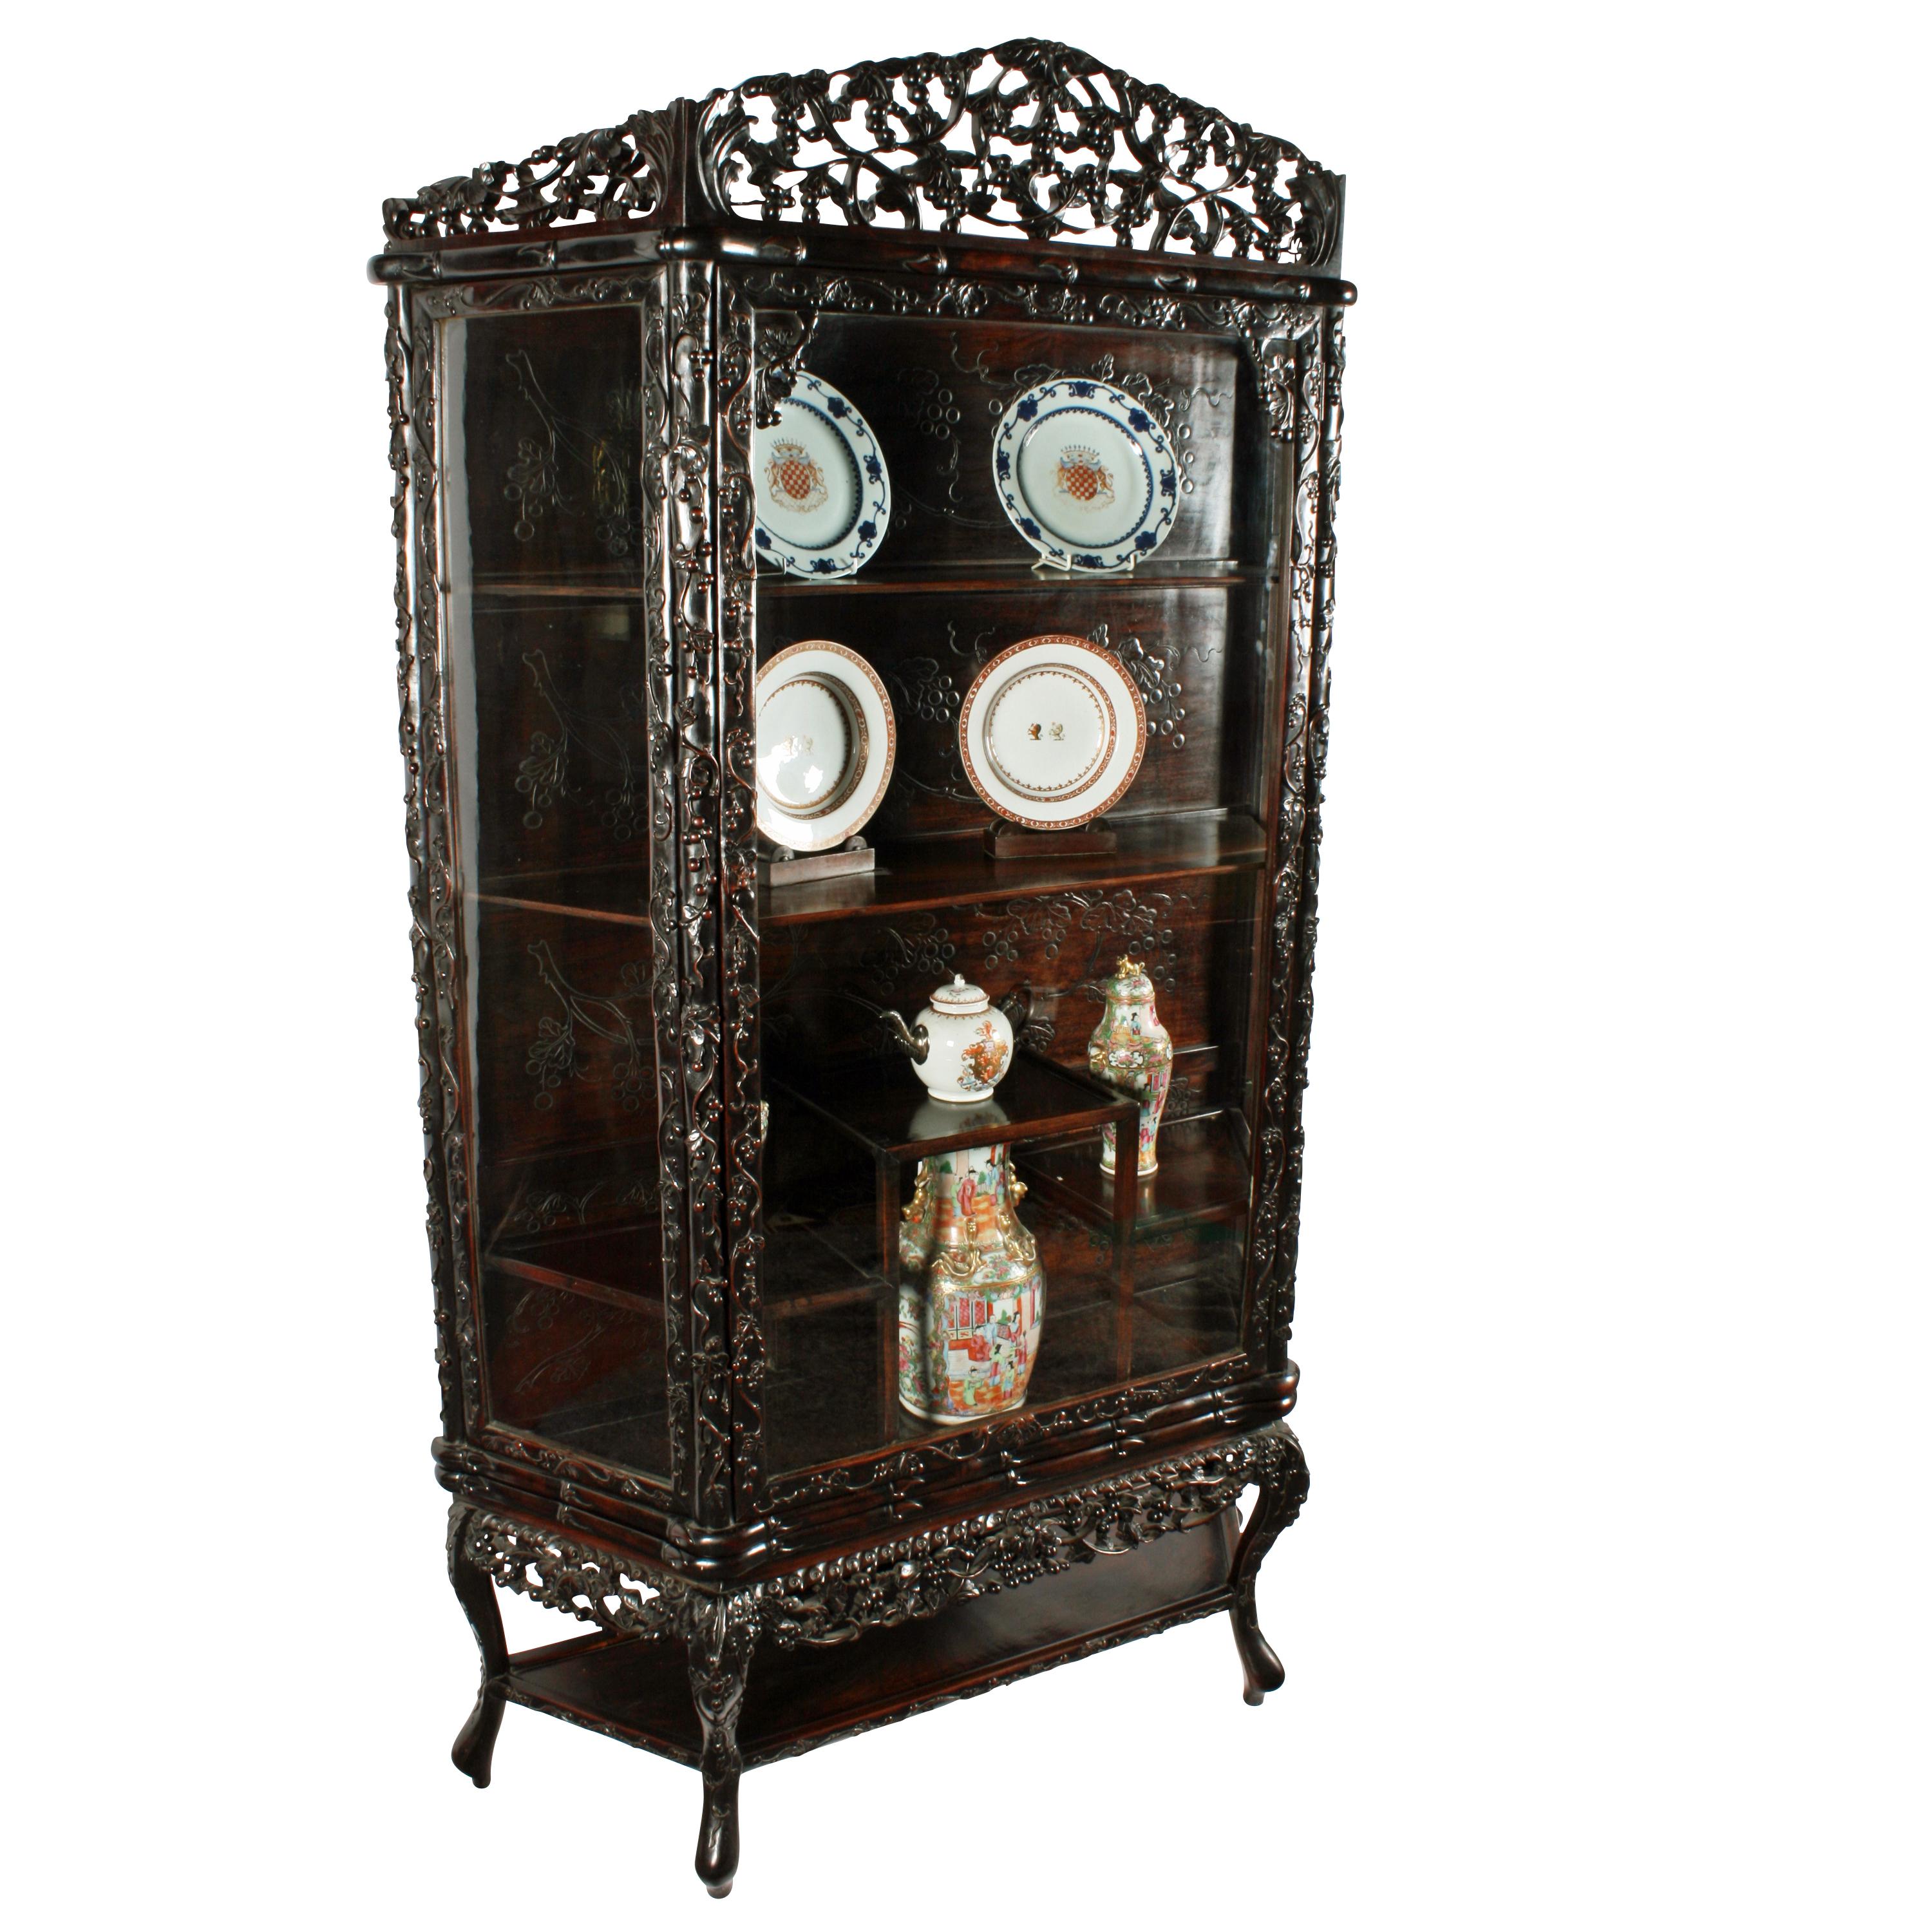 An early 20th century Chinese carved rosewood display cabinet.

The cabinet has a single glazed door and glazed panels that have frames carved with branches of flowers and fruit.

The horizontal frame above and below the door is faux bamboo